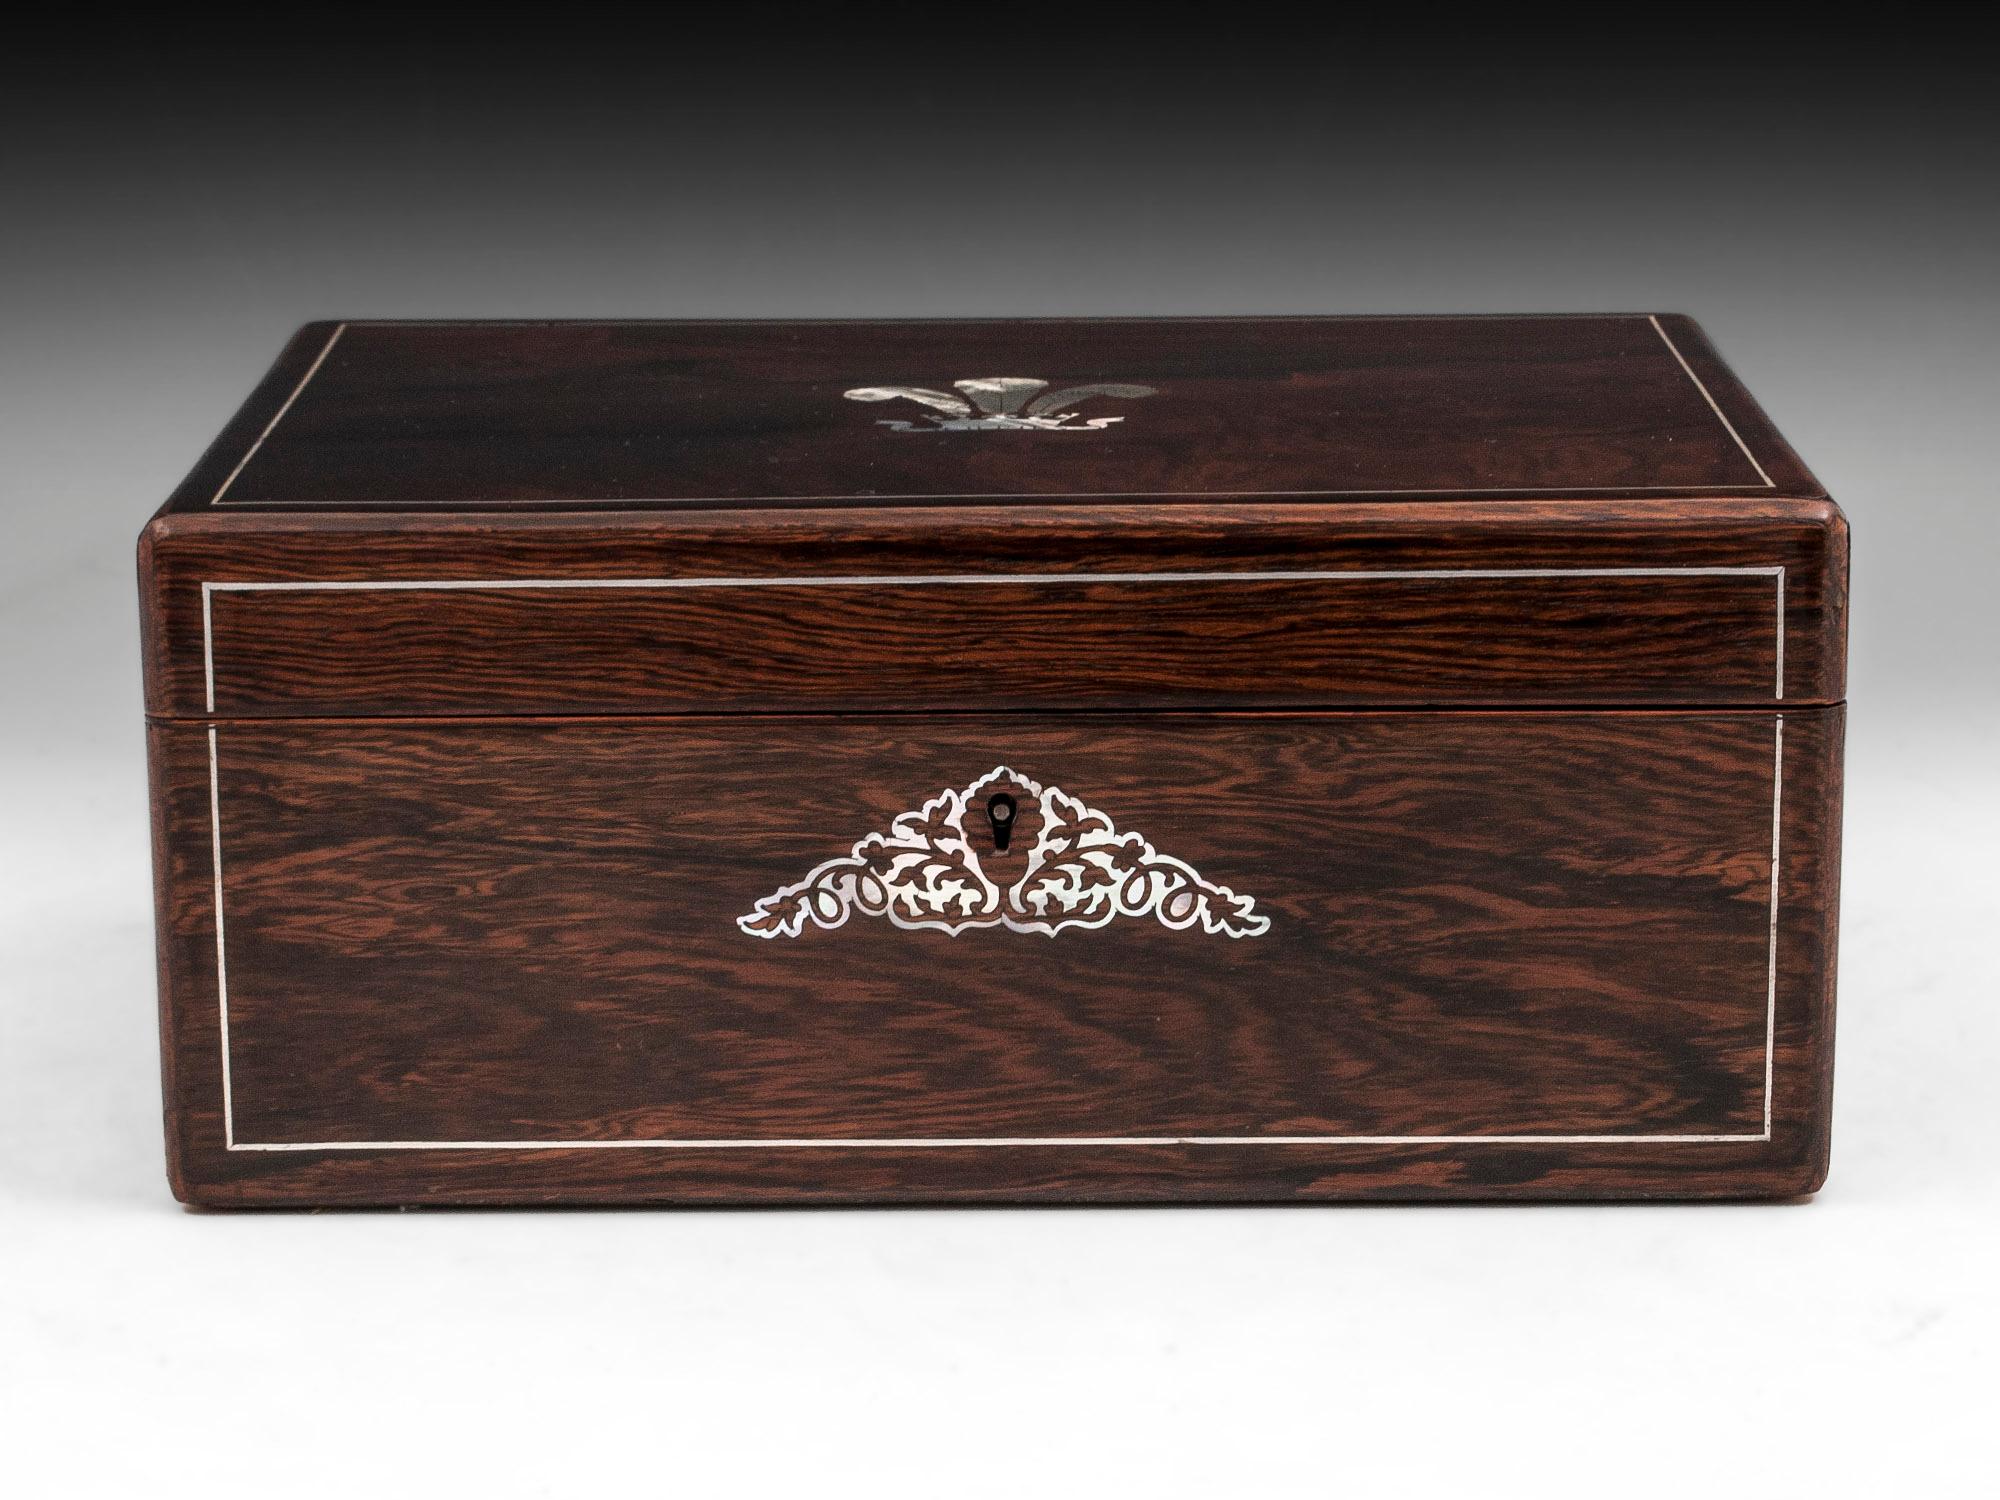 Antique jewelry box veneered in mahogany and mother of pearl inlays, with the top drawing your eye to the exquisite engraved mother of pearl 